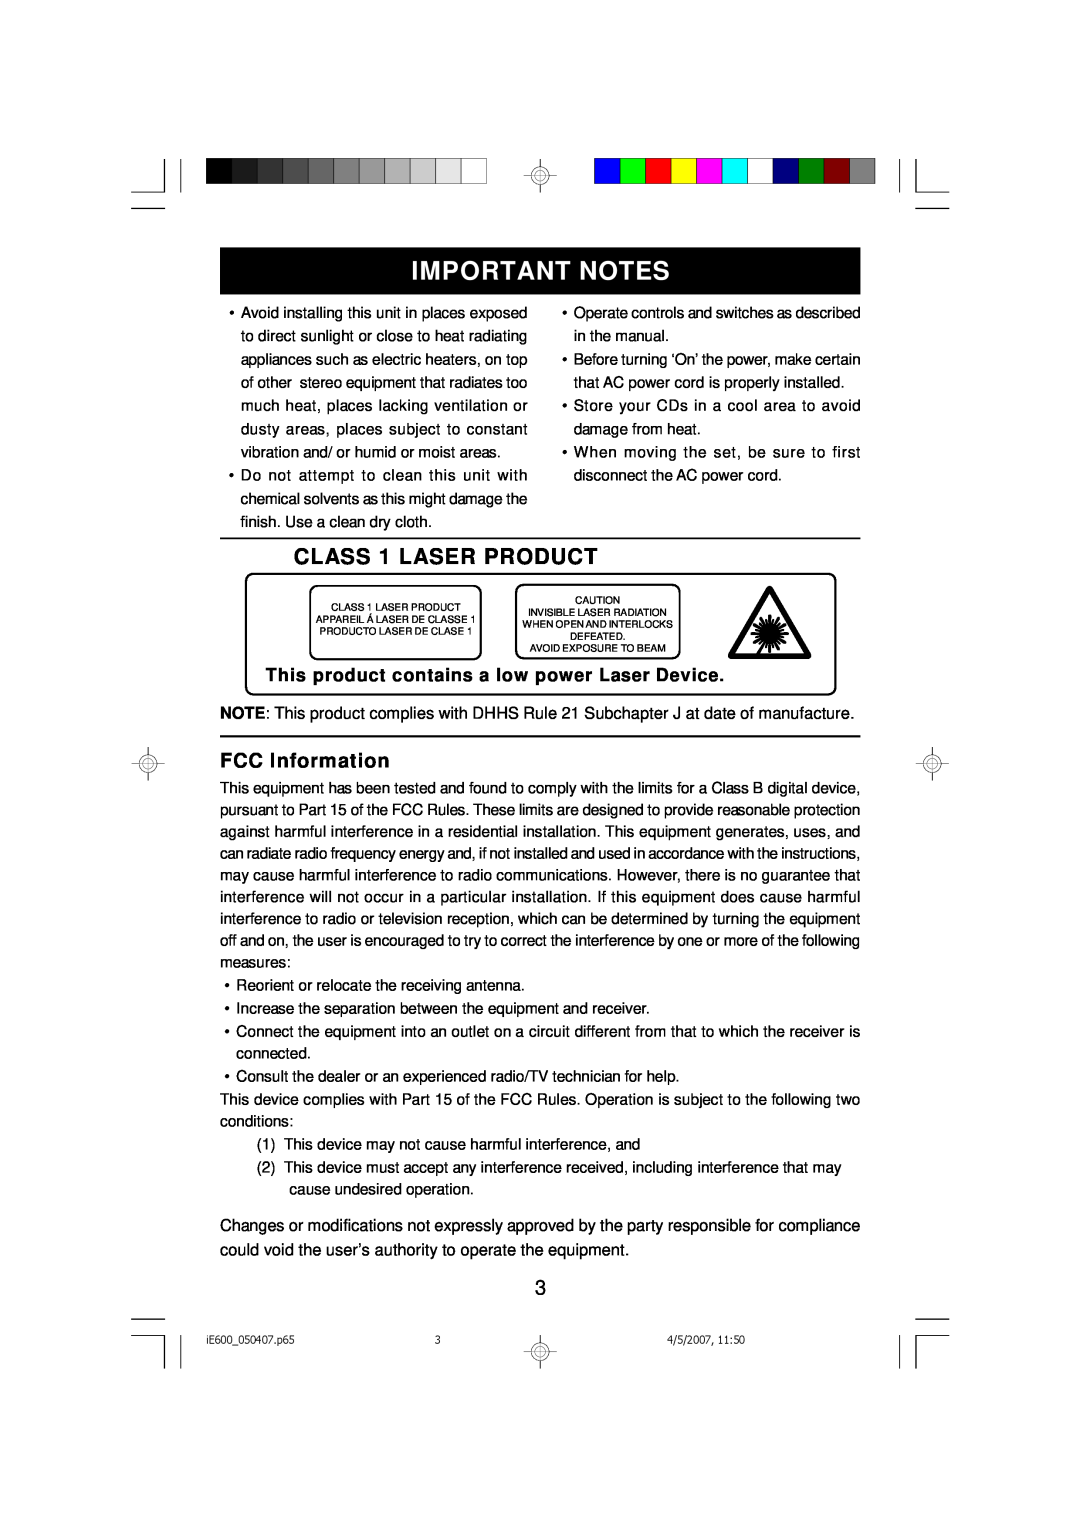 Emerson iE600 owner manual Important Notes, CLASS 1 LASER PRODUCT, FCC Information 